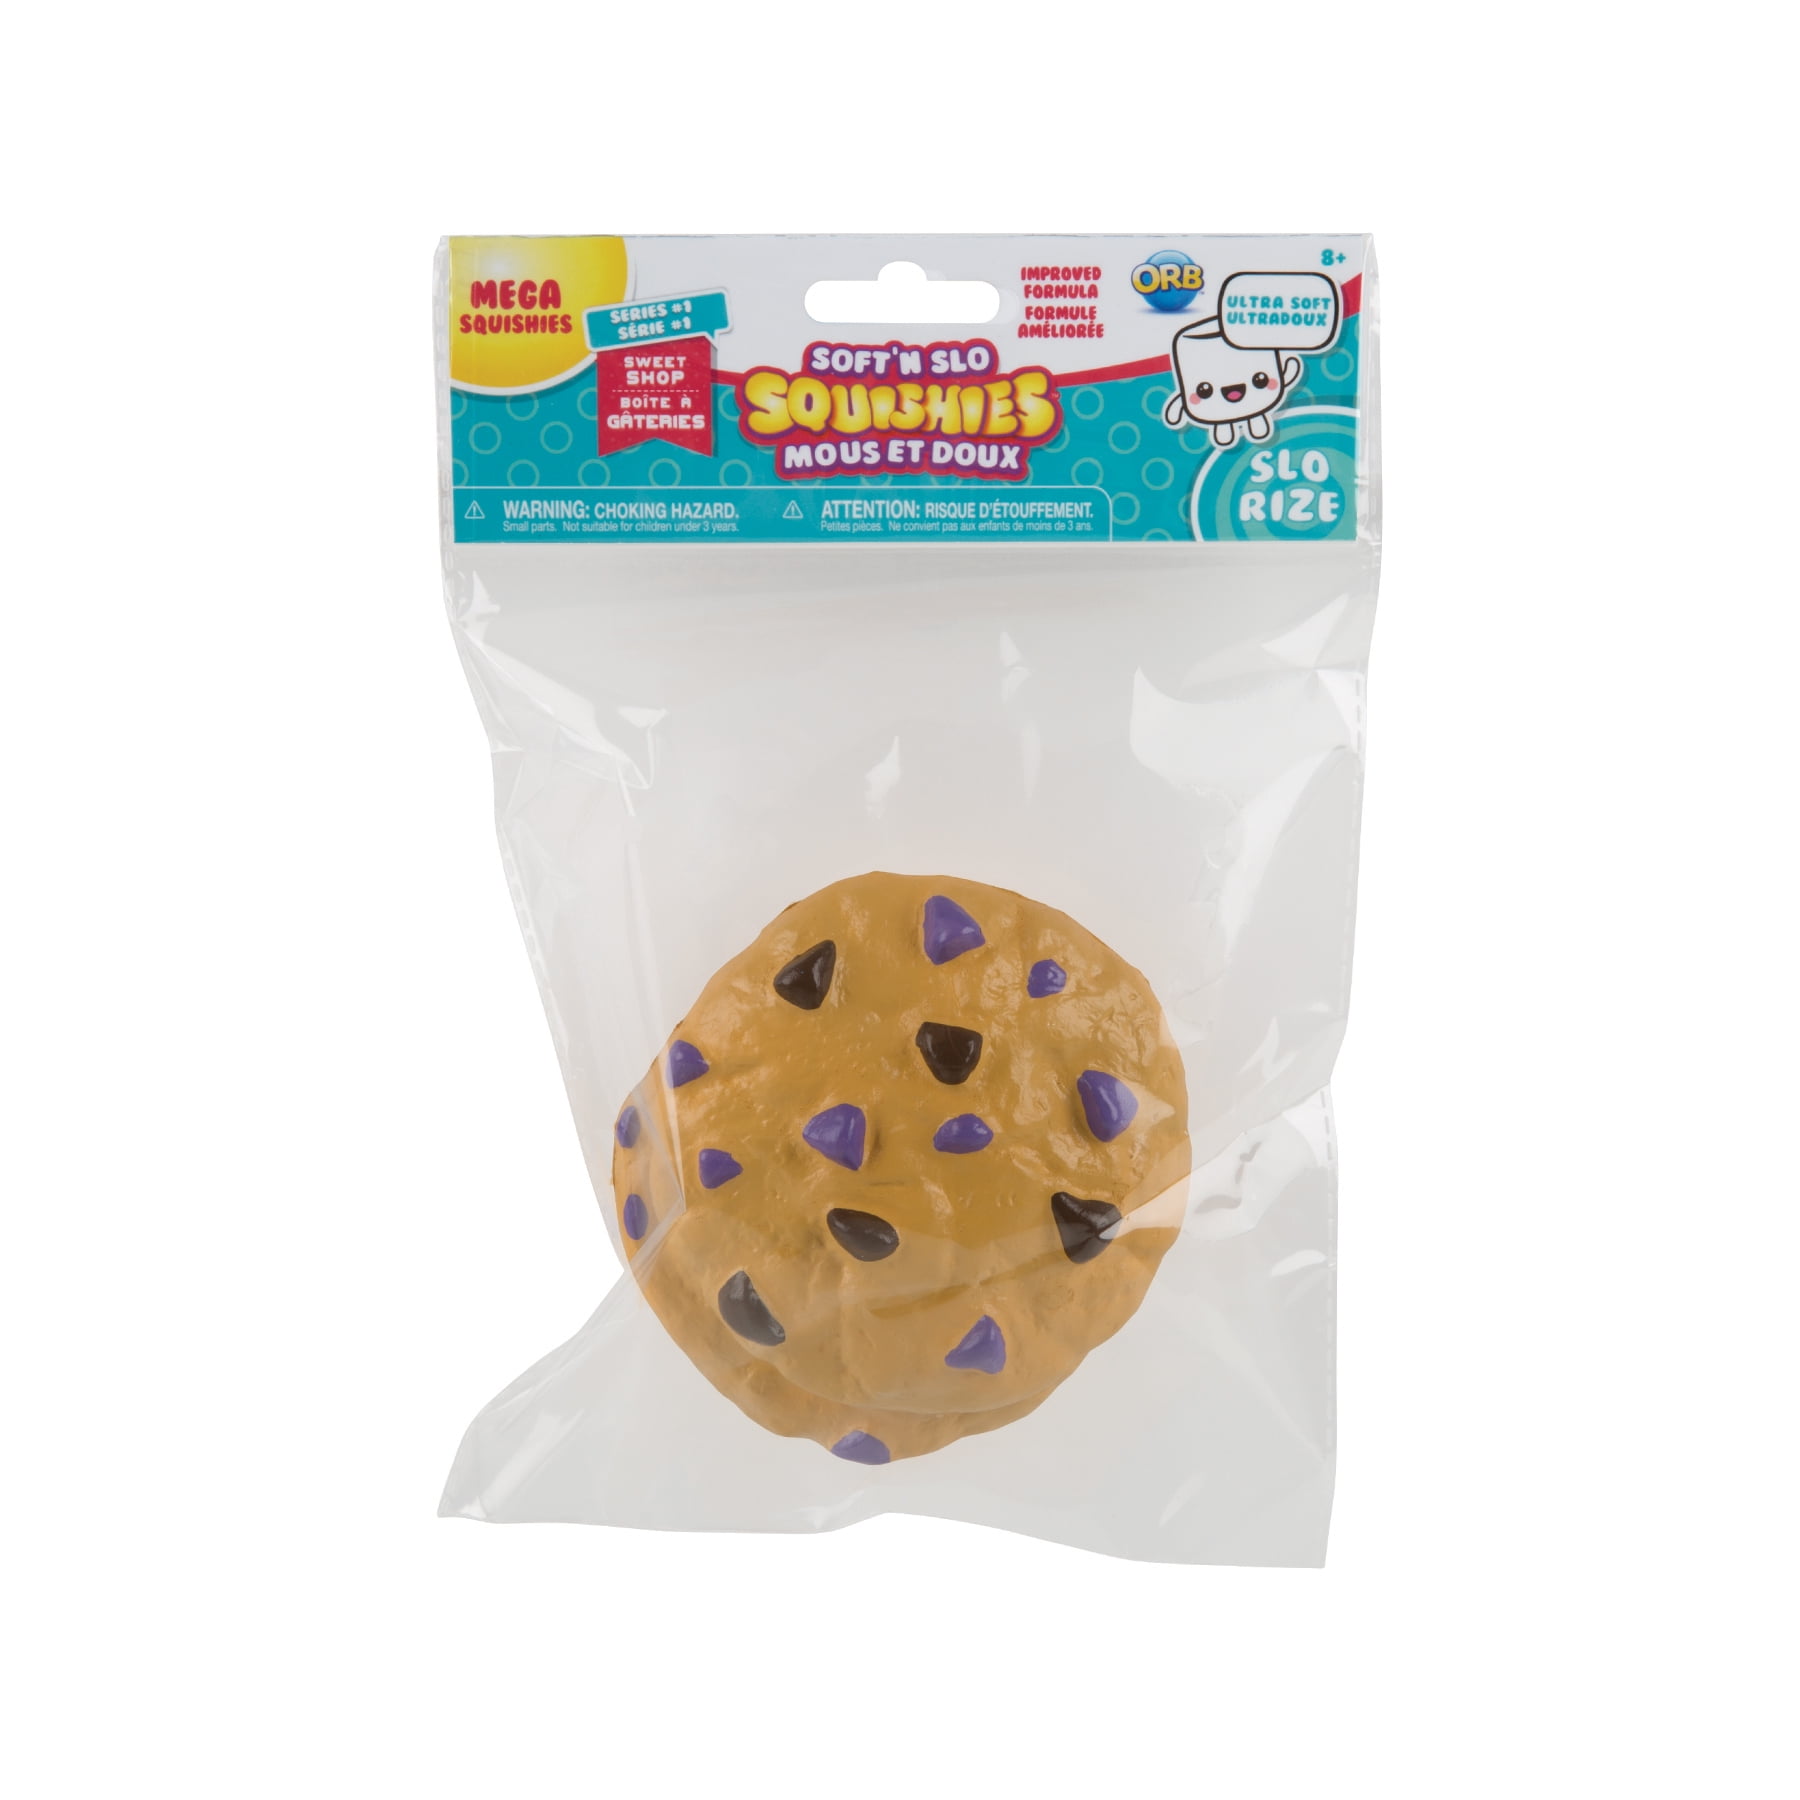 Soft'n Slo Squishies Chip Cookie -